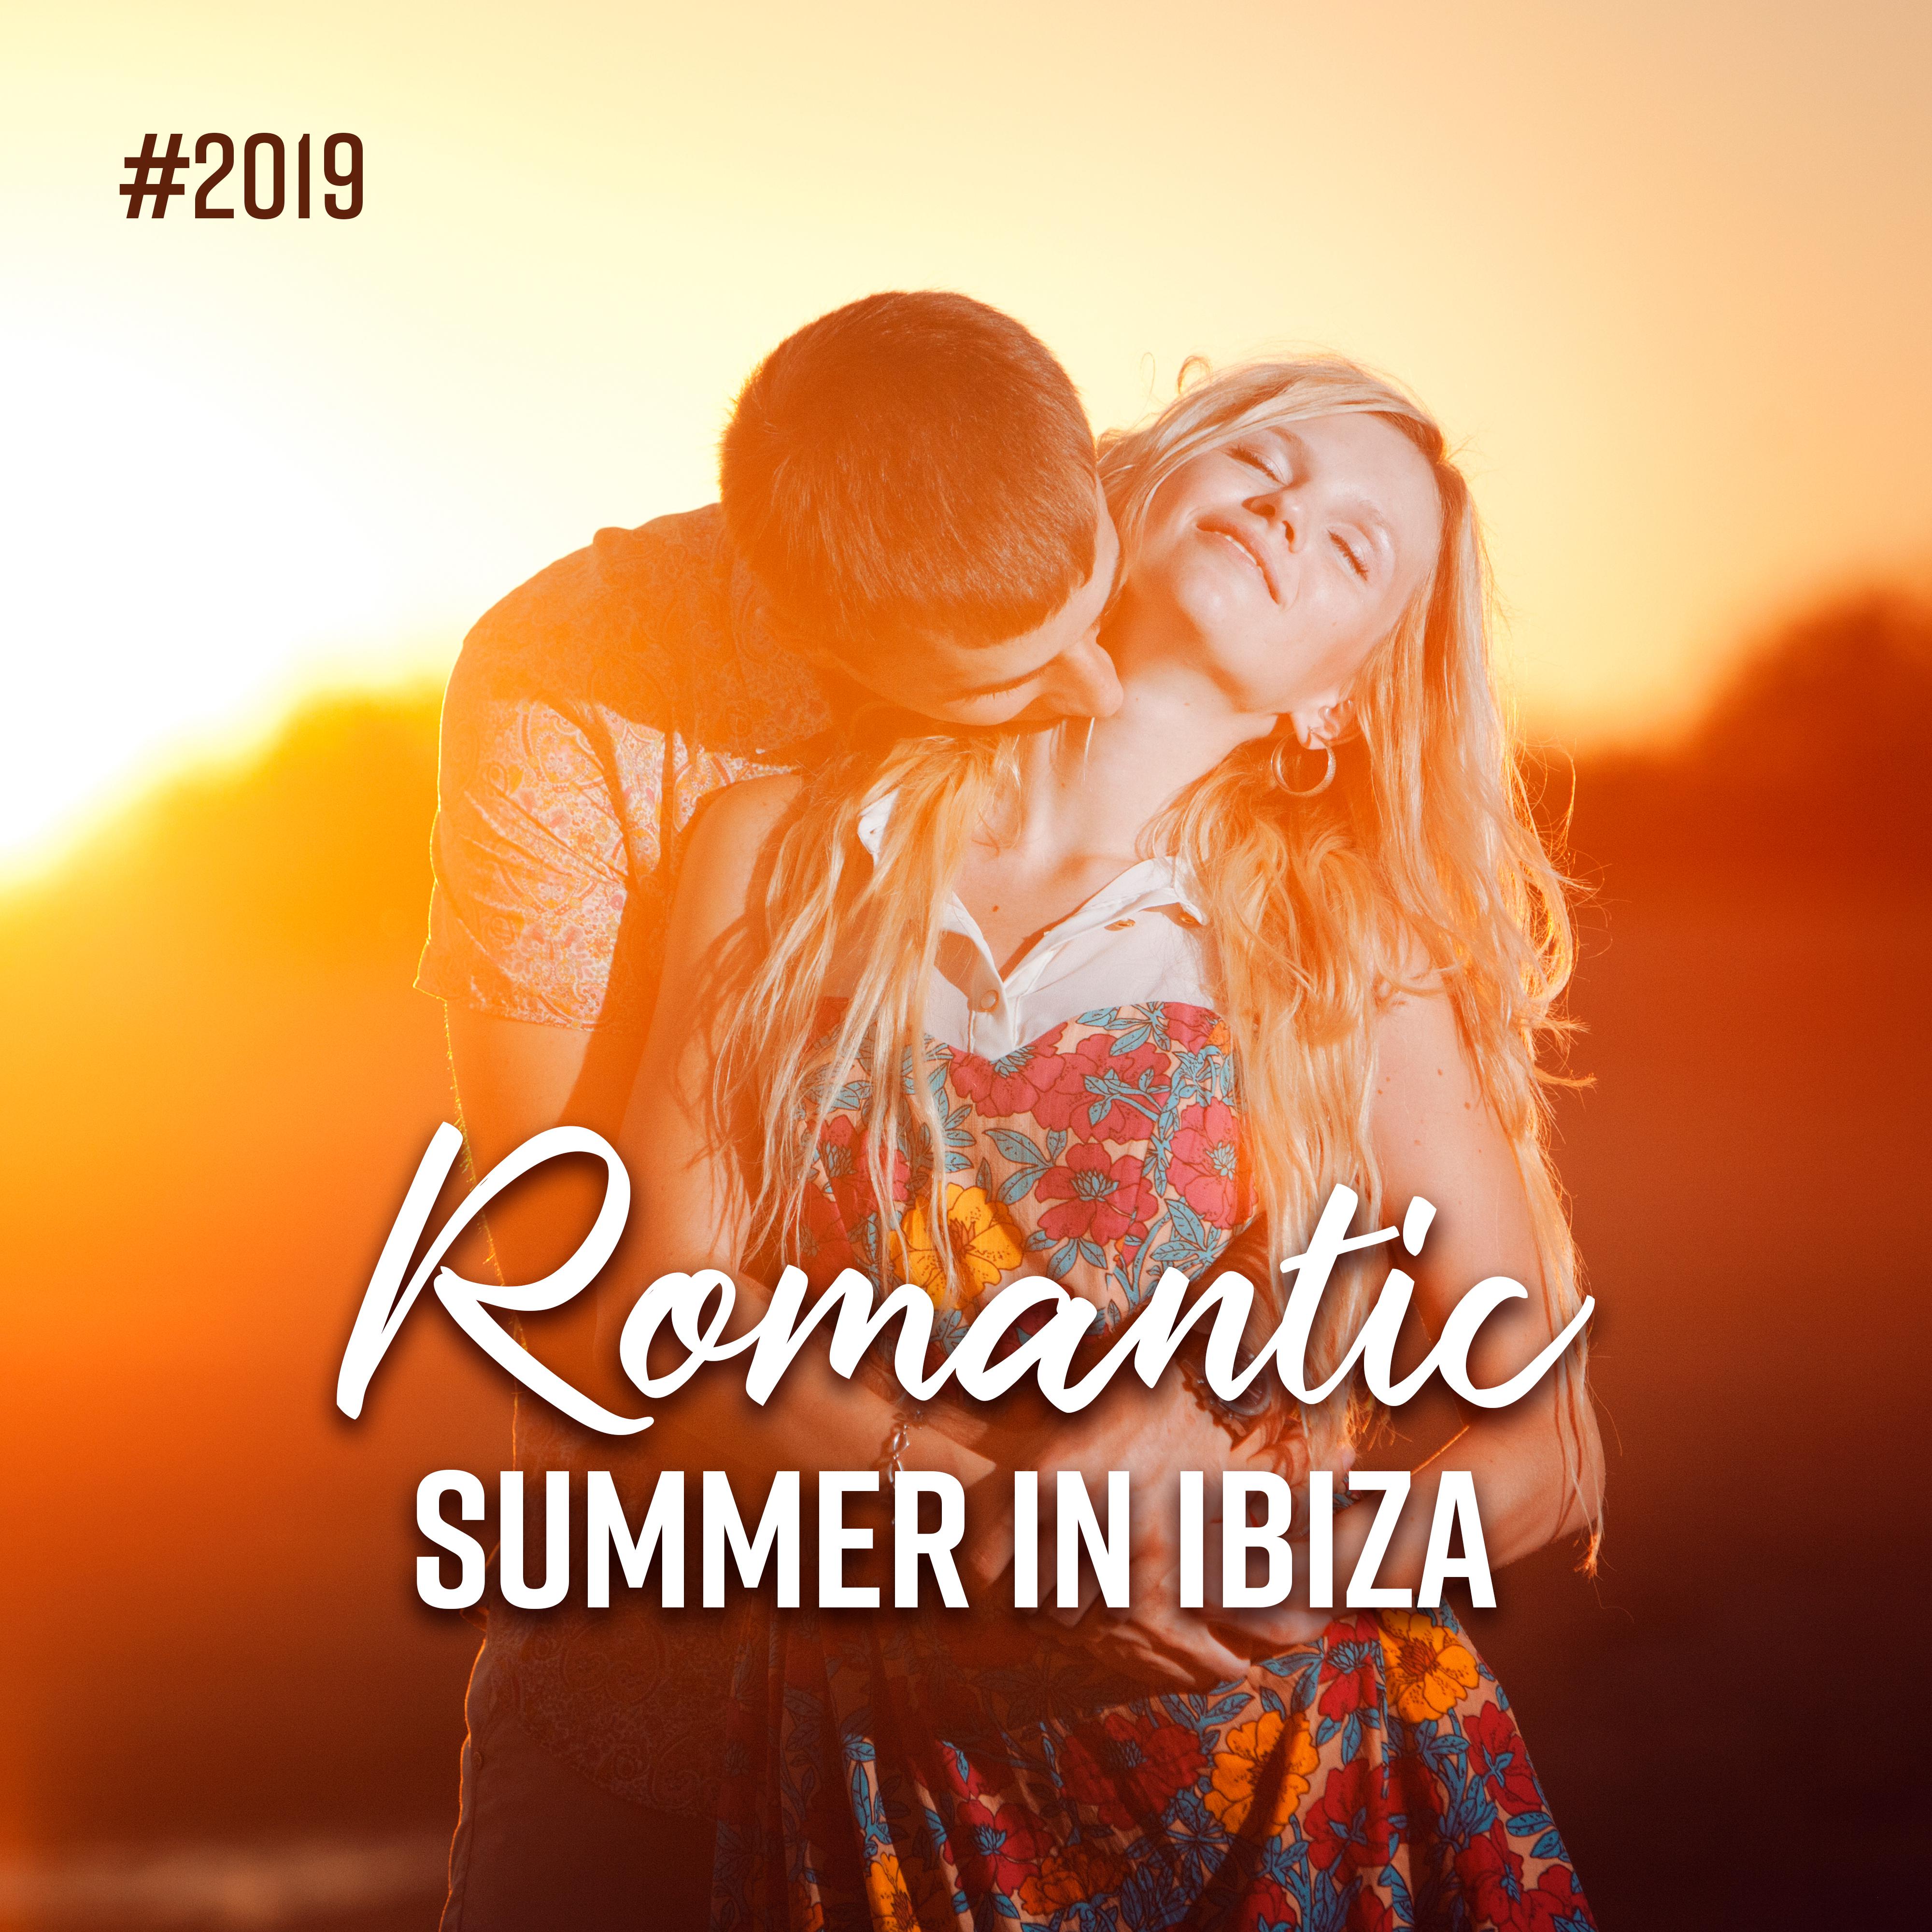 #2019 Romantic Summer in Ibiza: 15 Love Tracks from Ibiza, Summer Infatuation, Love Chillout Melodies, Tropical Sounds, Rest for Two, Music for the Beach